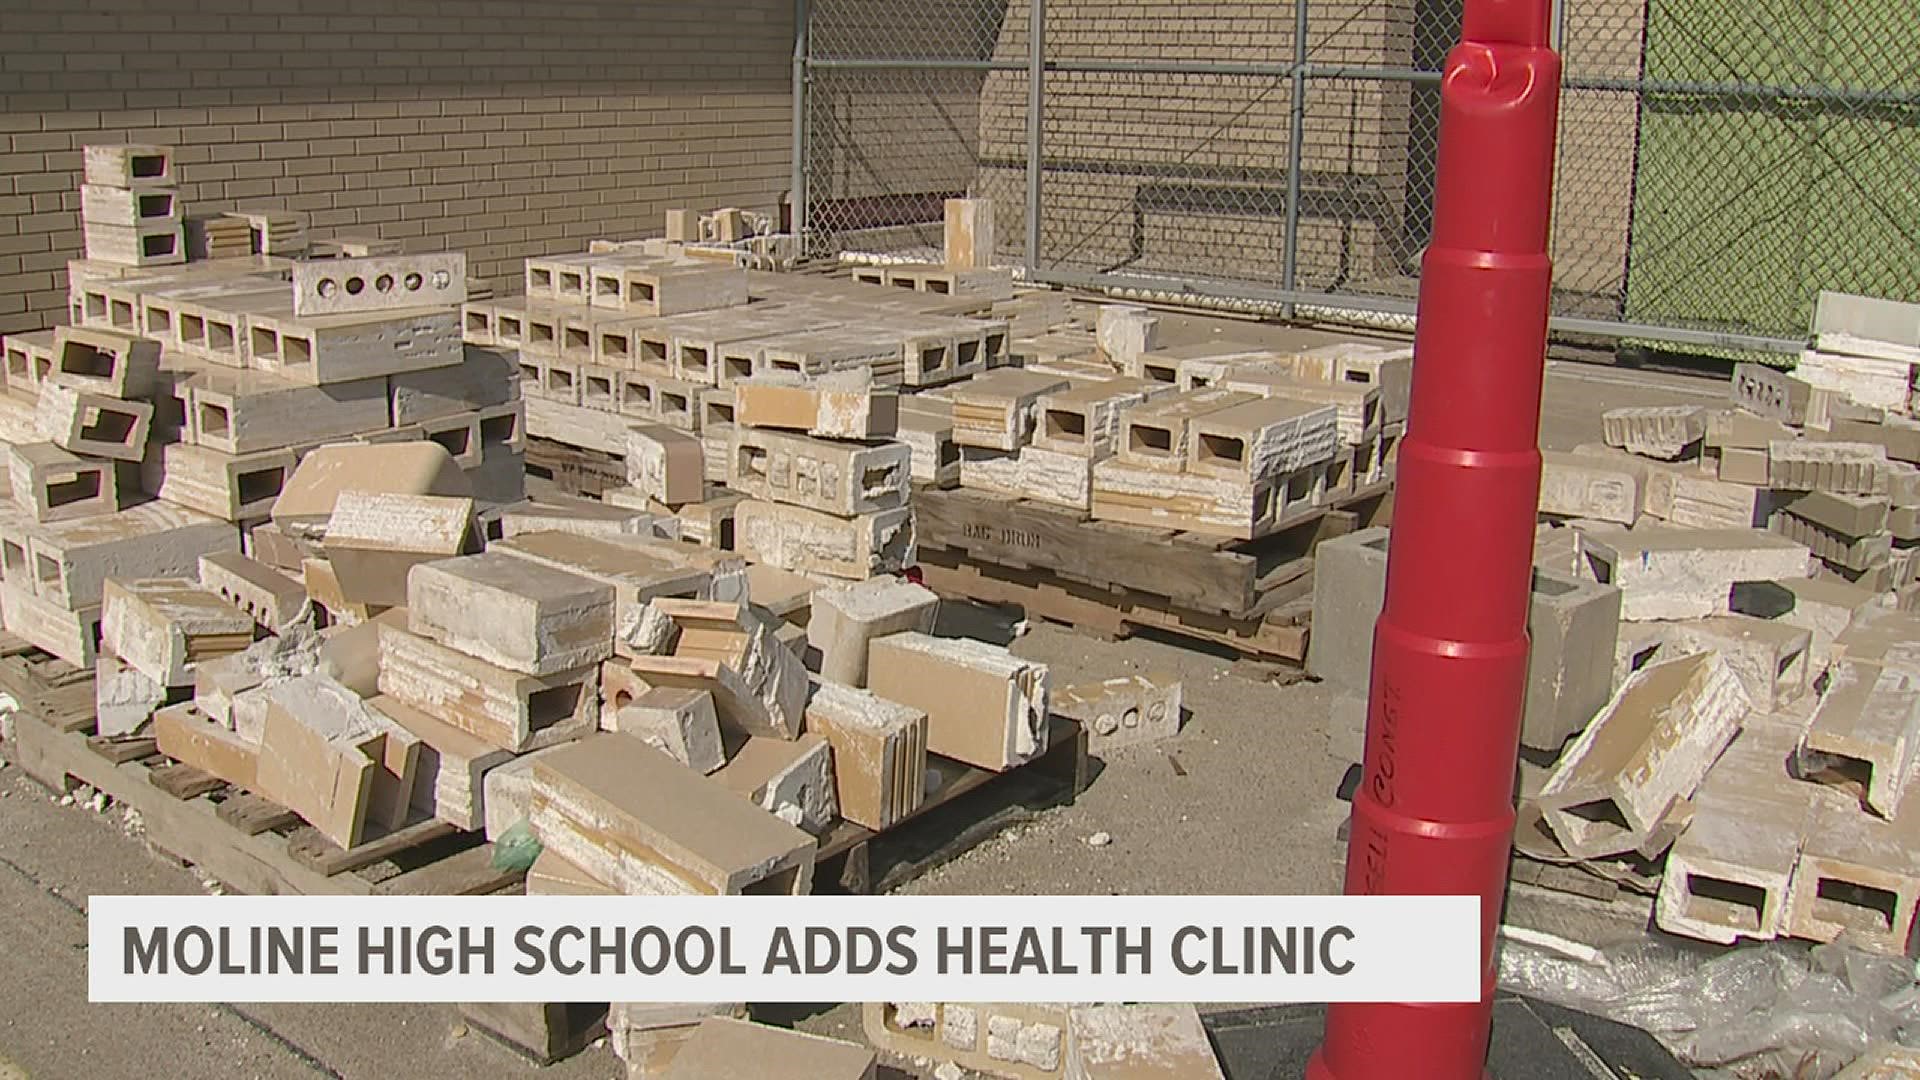 The district says the clinic is intended to complement the school's nursing staff with additional services.